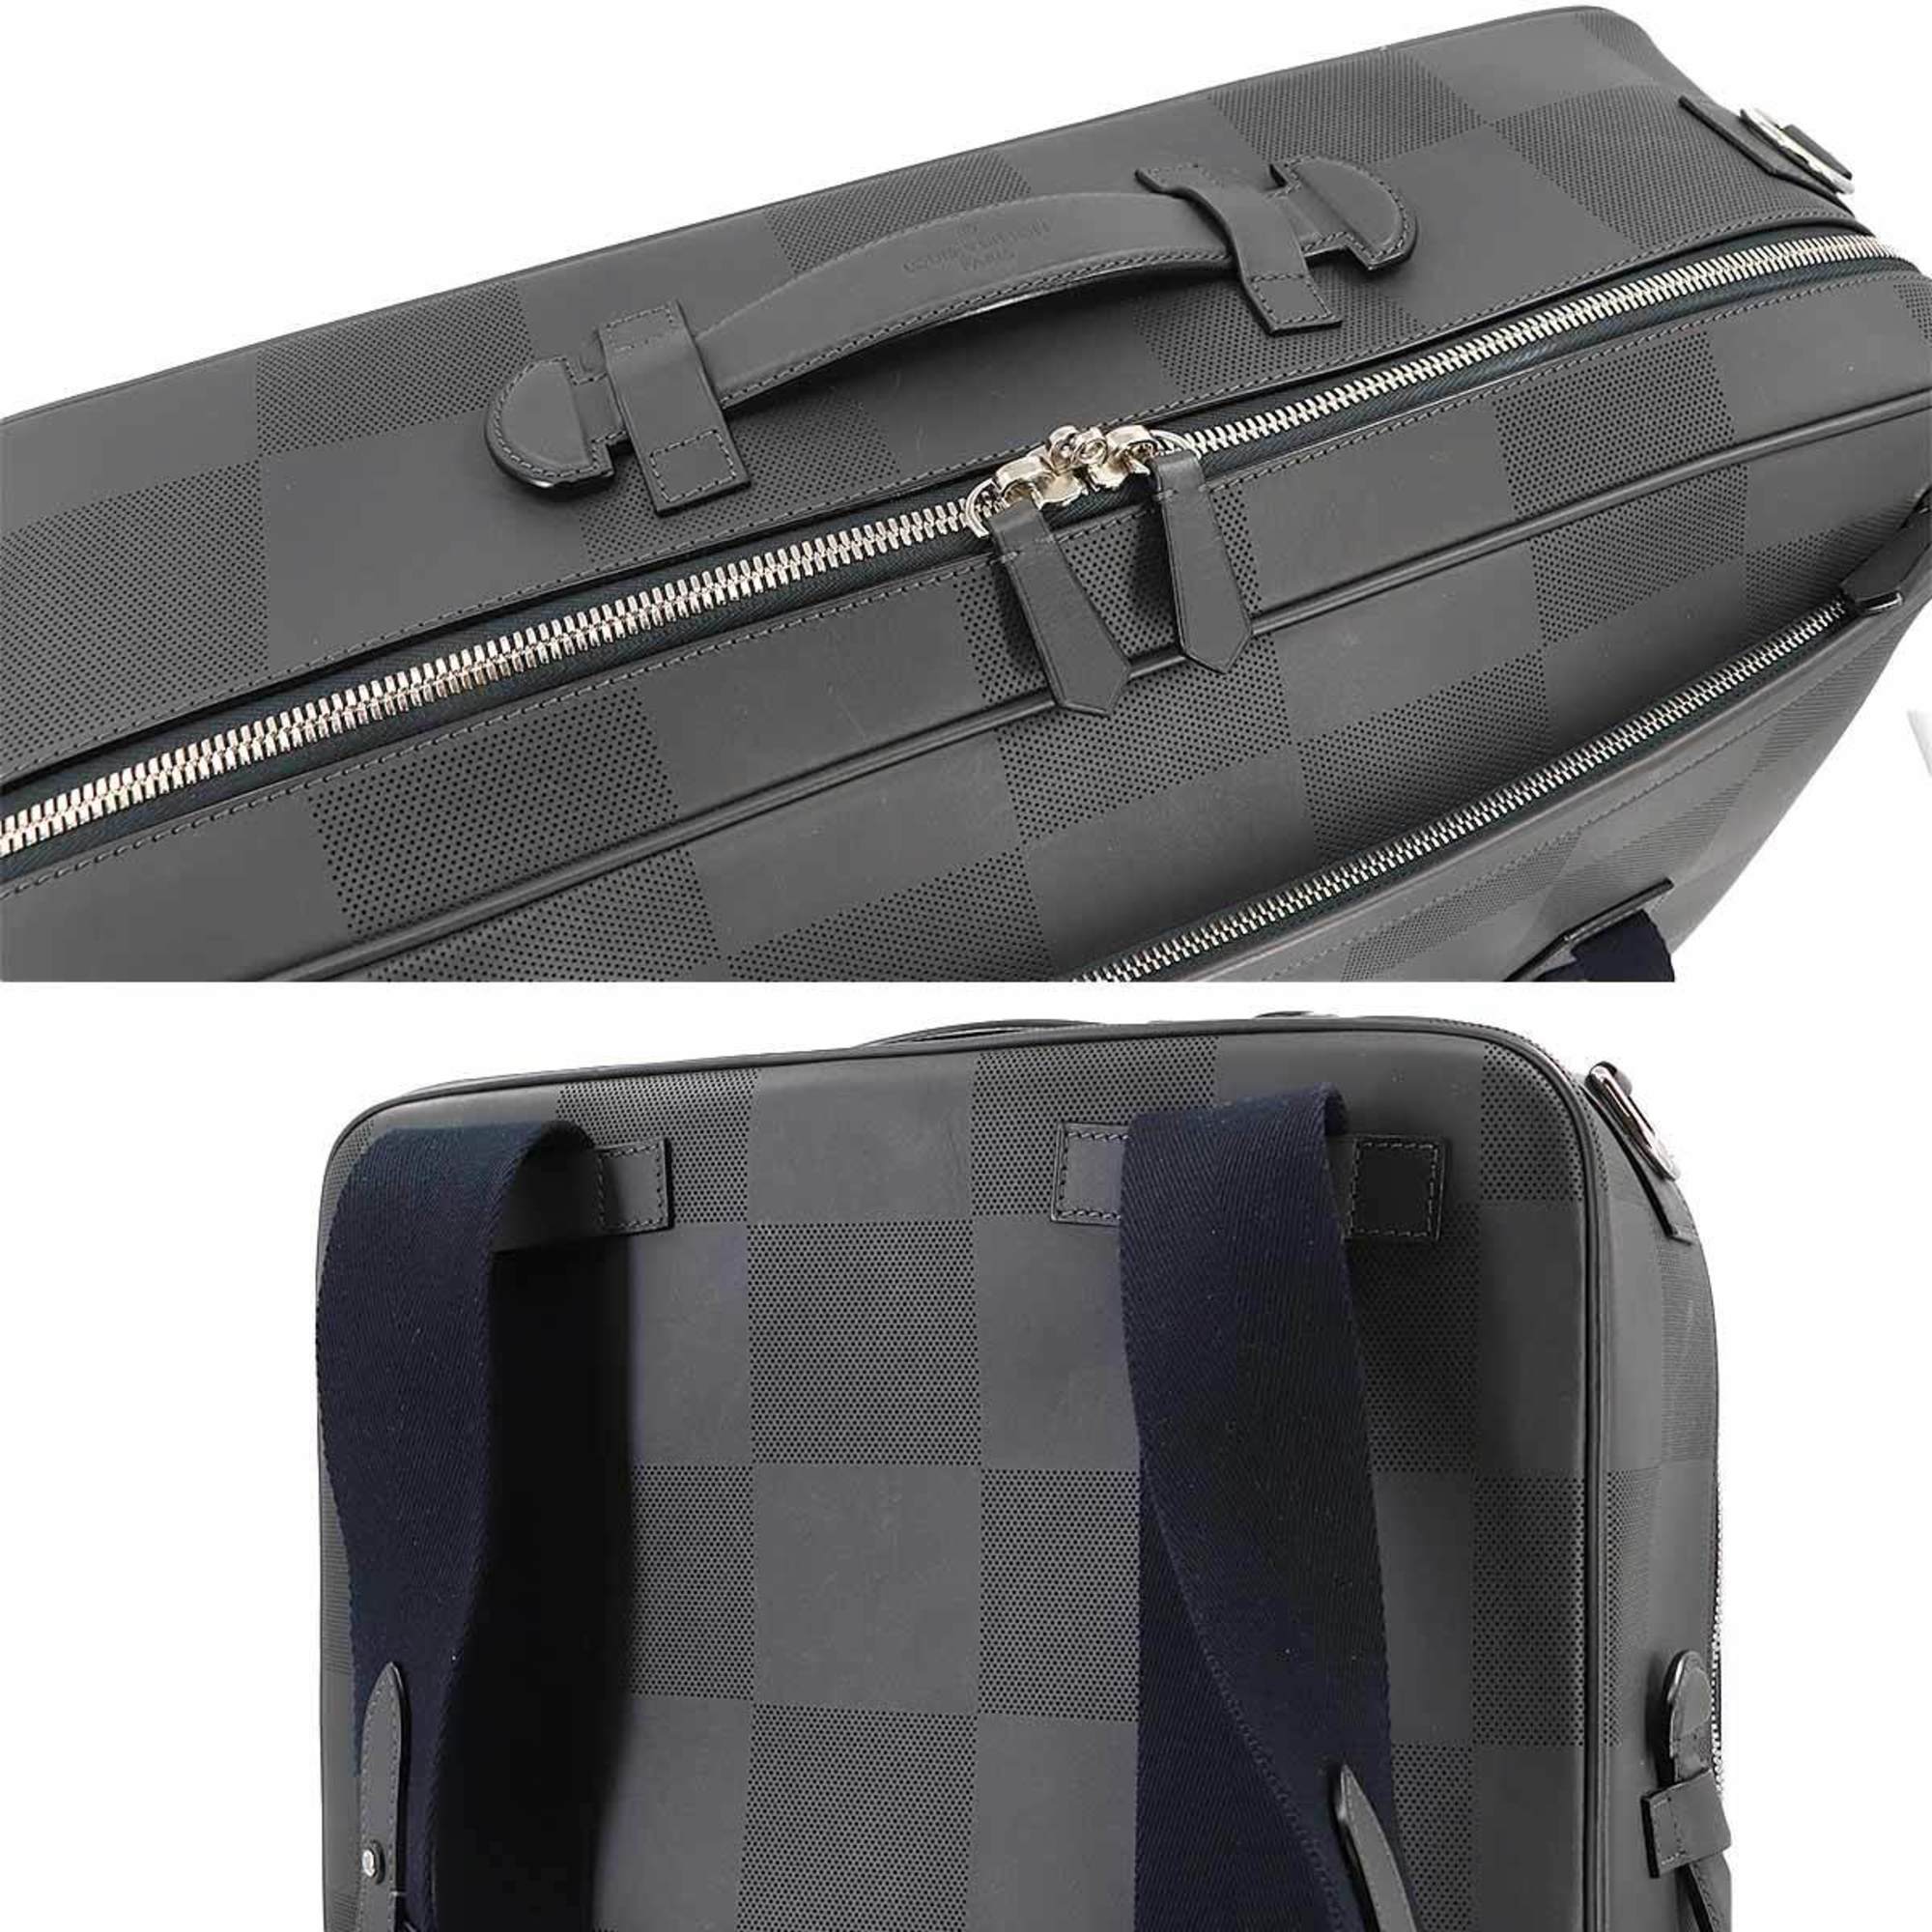 Louis Vuitton Nomad Grand Damier Sirius A 3way Shoulder Backpack Bag Leather Grey M85131